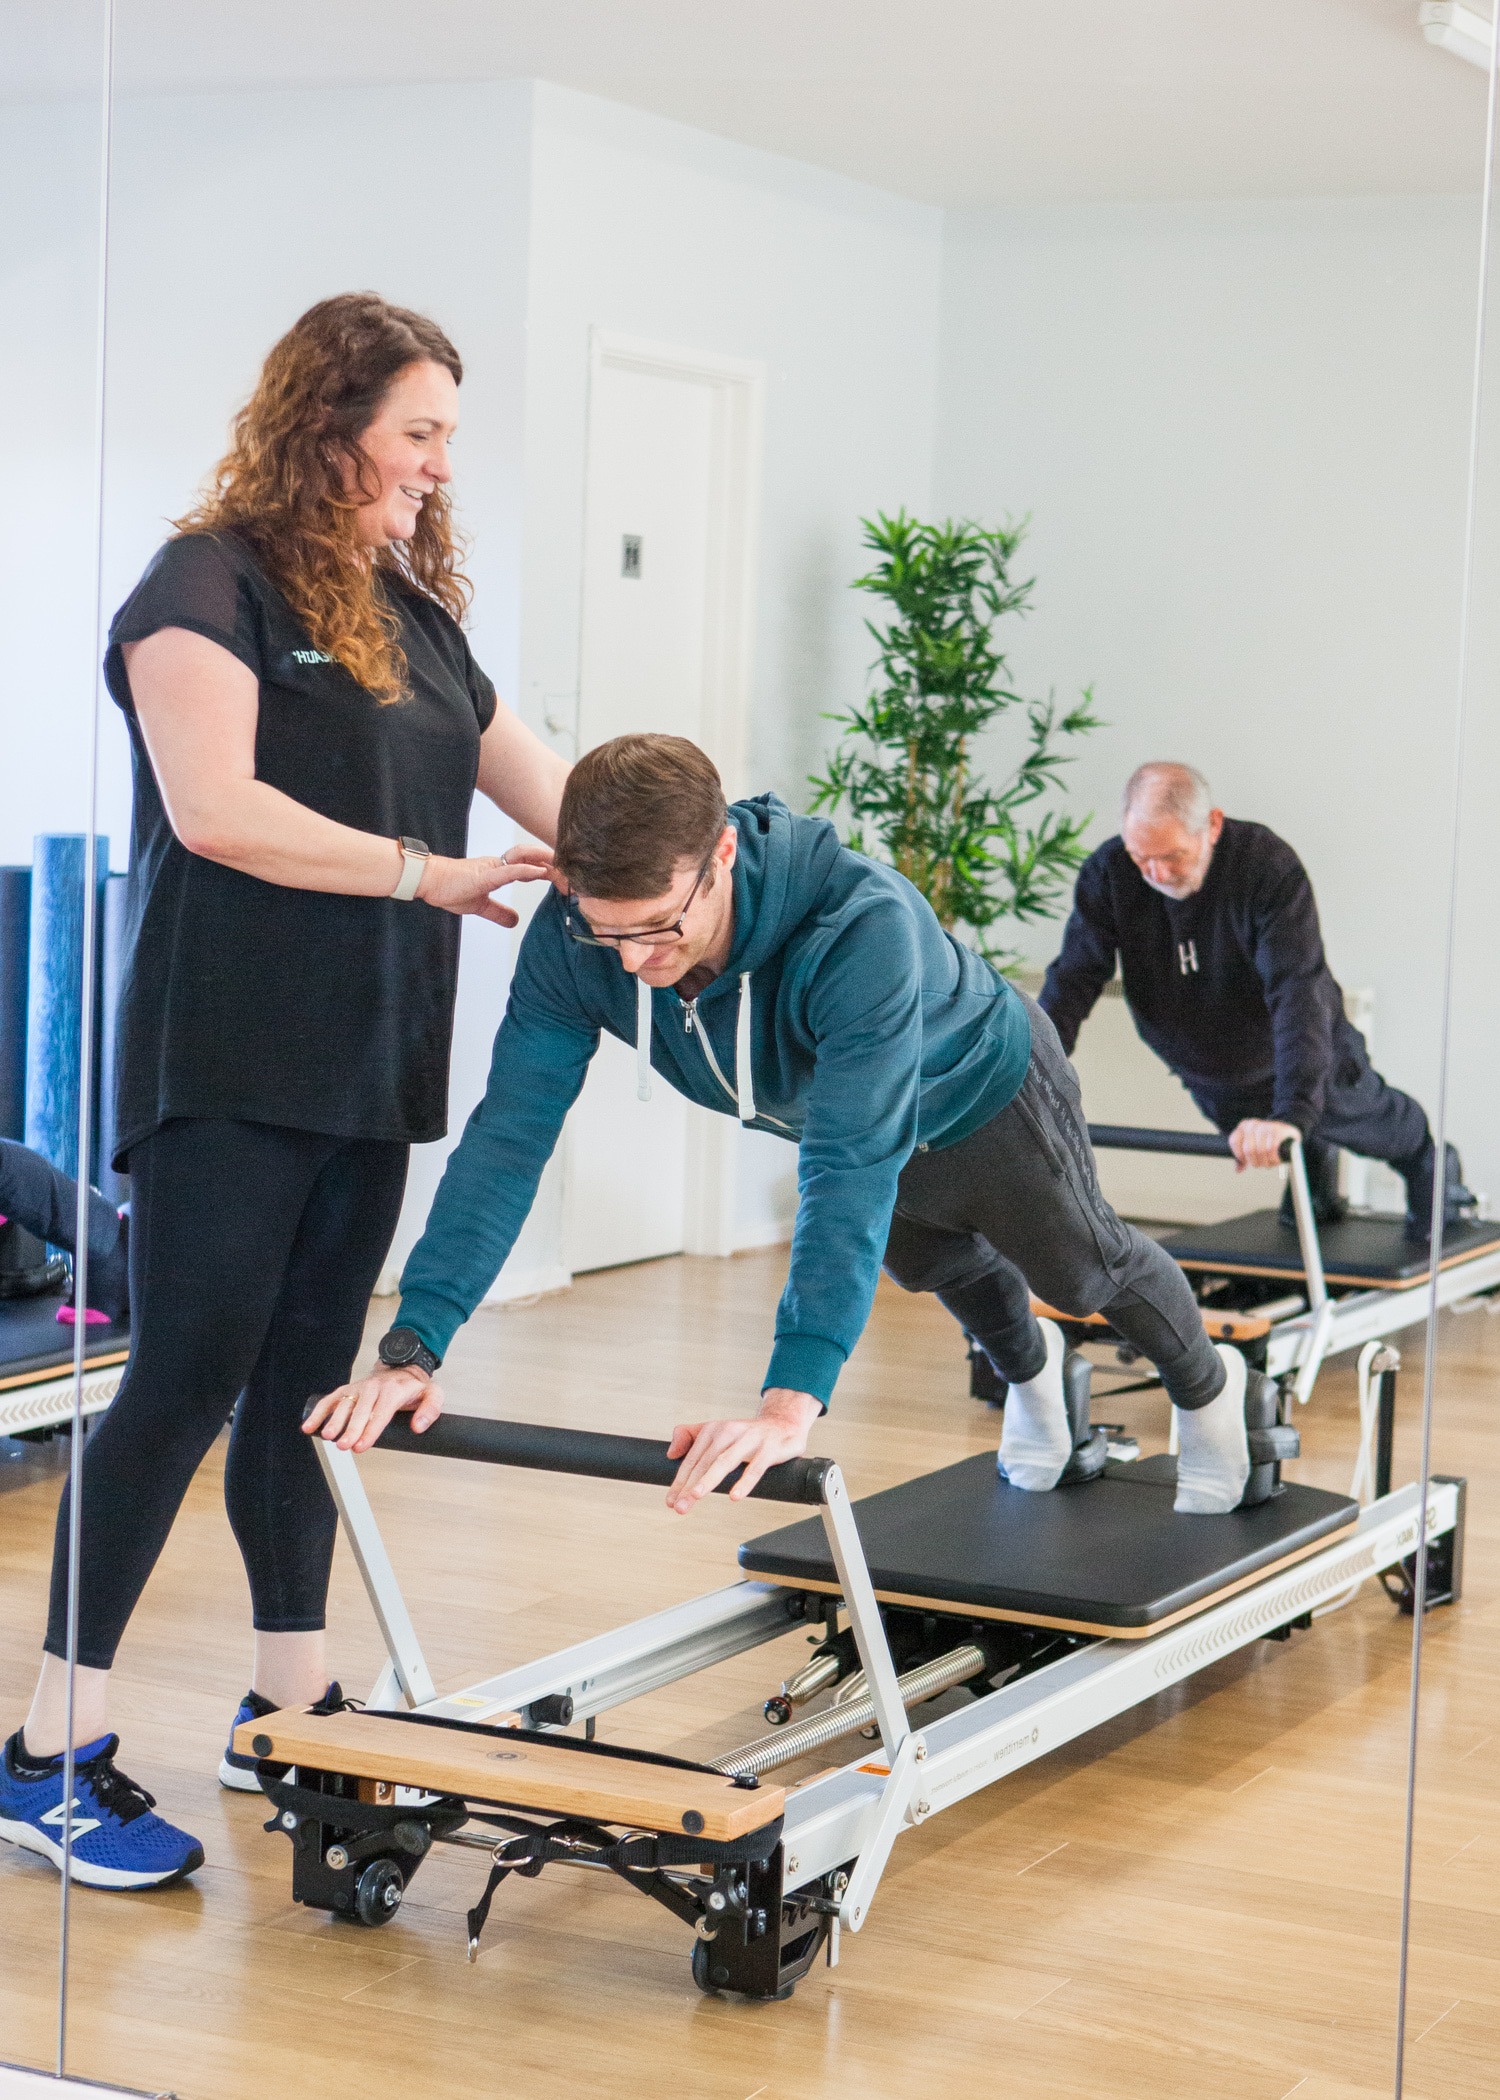 reformer pilates at active health